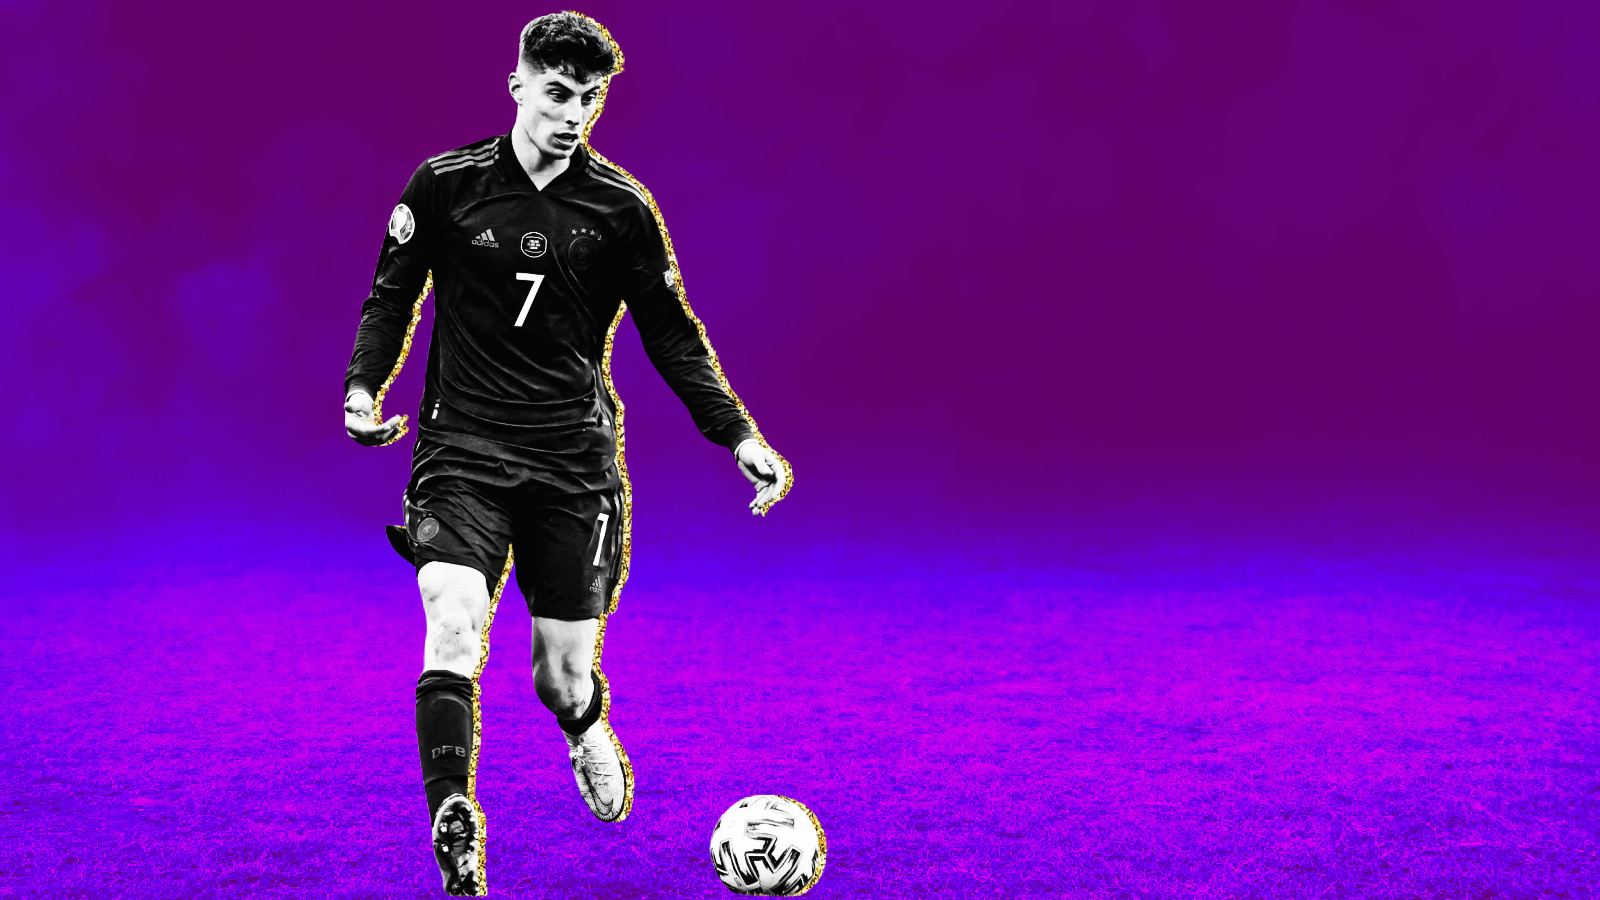 Kai Havertz focused at the ball during game against England (1)